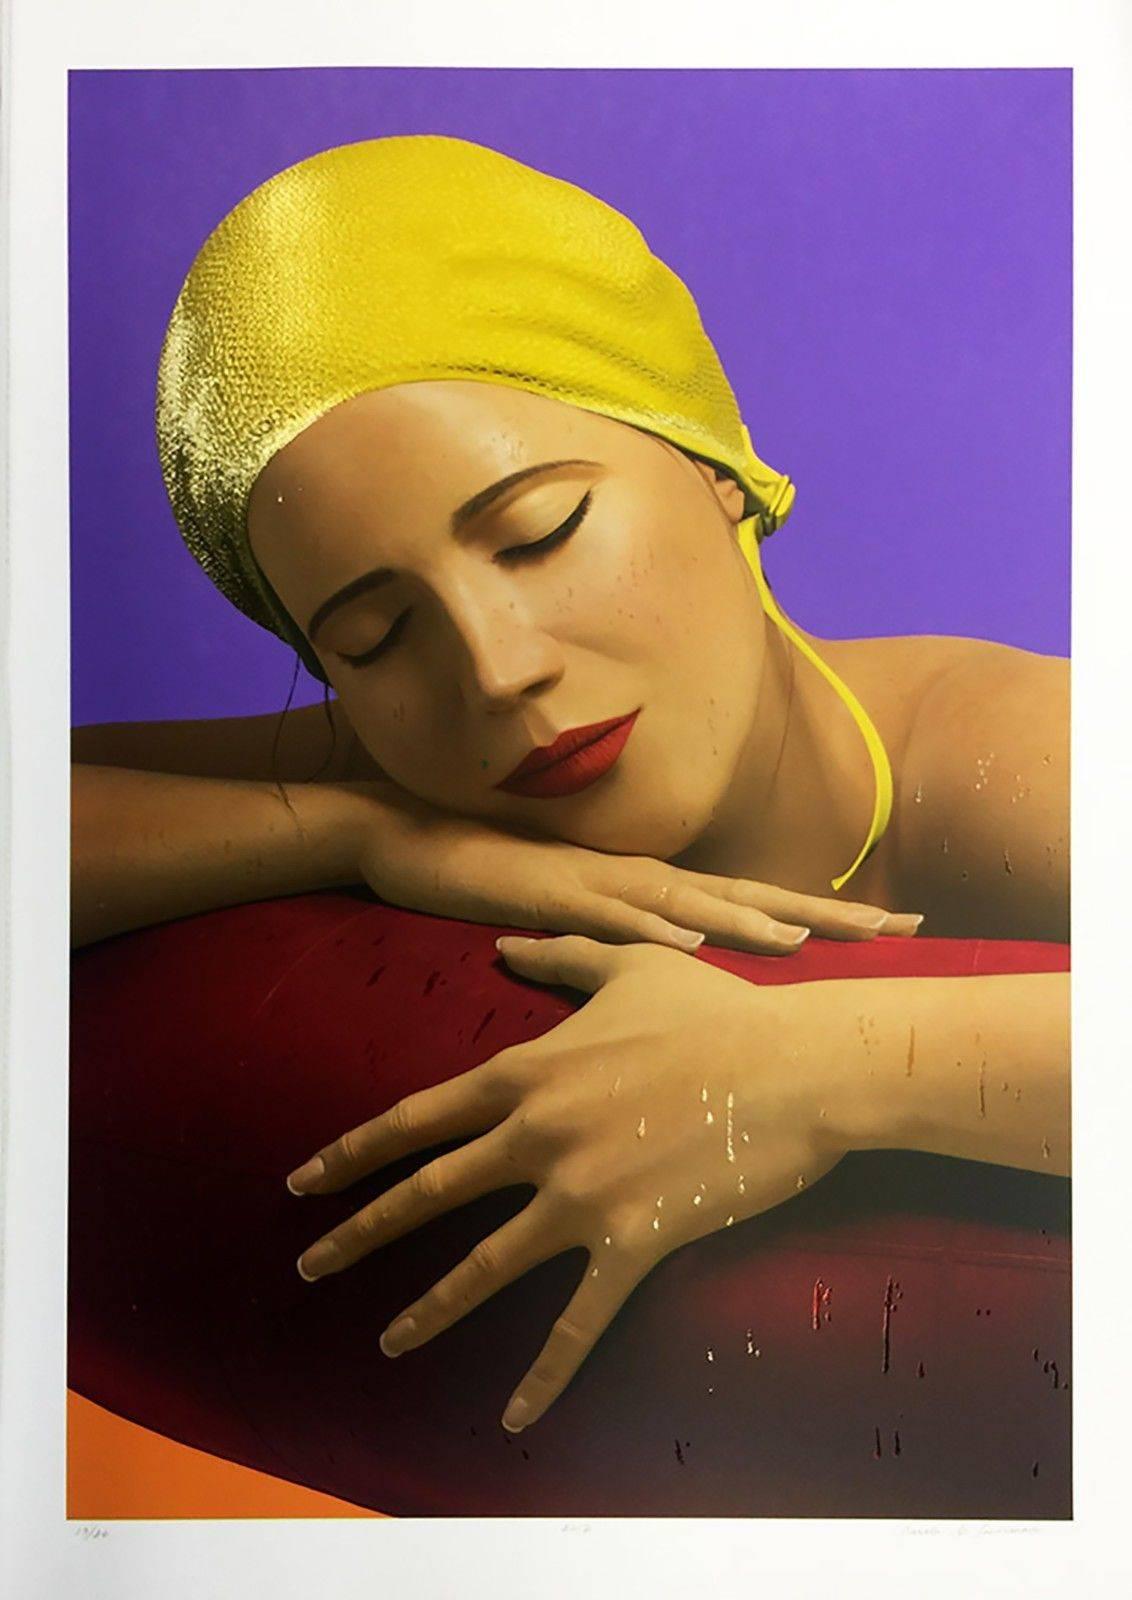 SERENA WITH YELLOW CAP - Print by Carole Feuerman